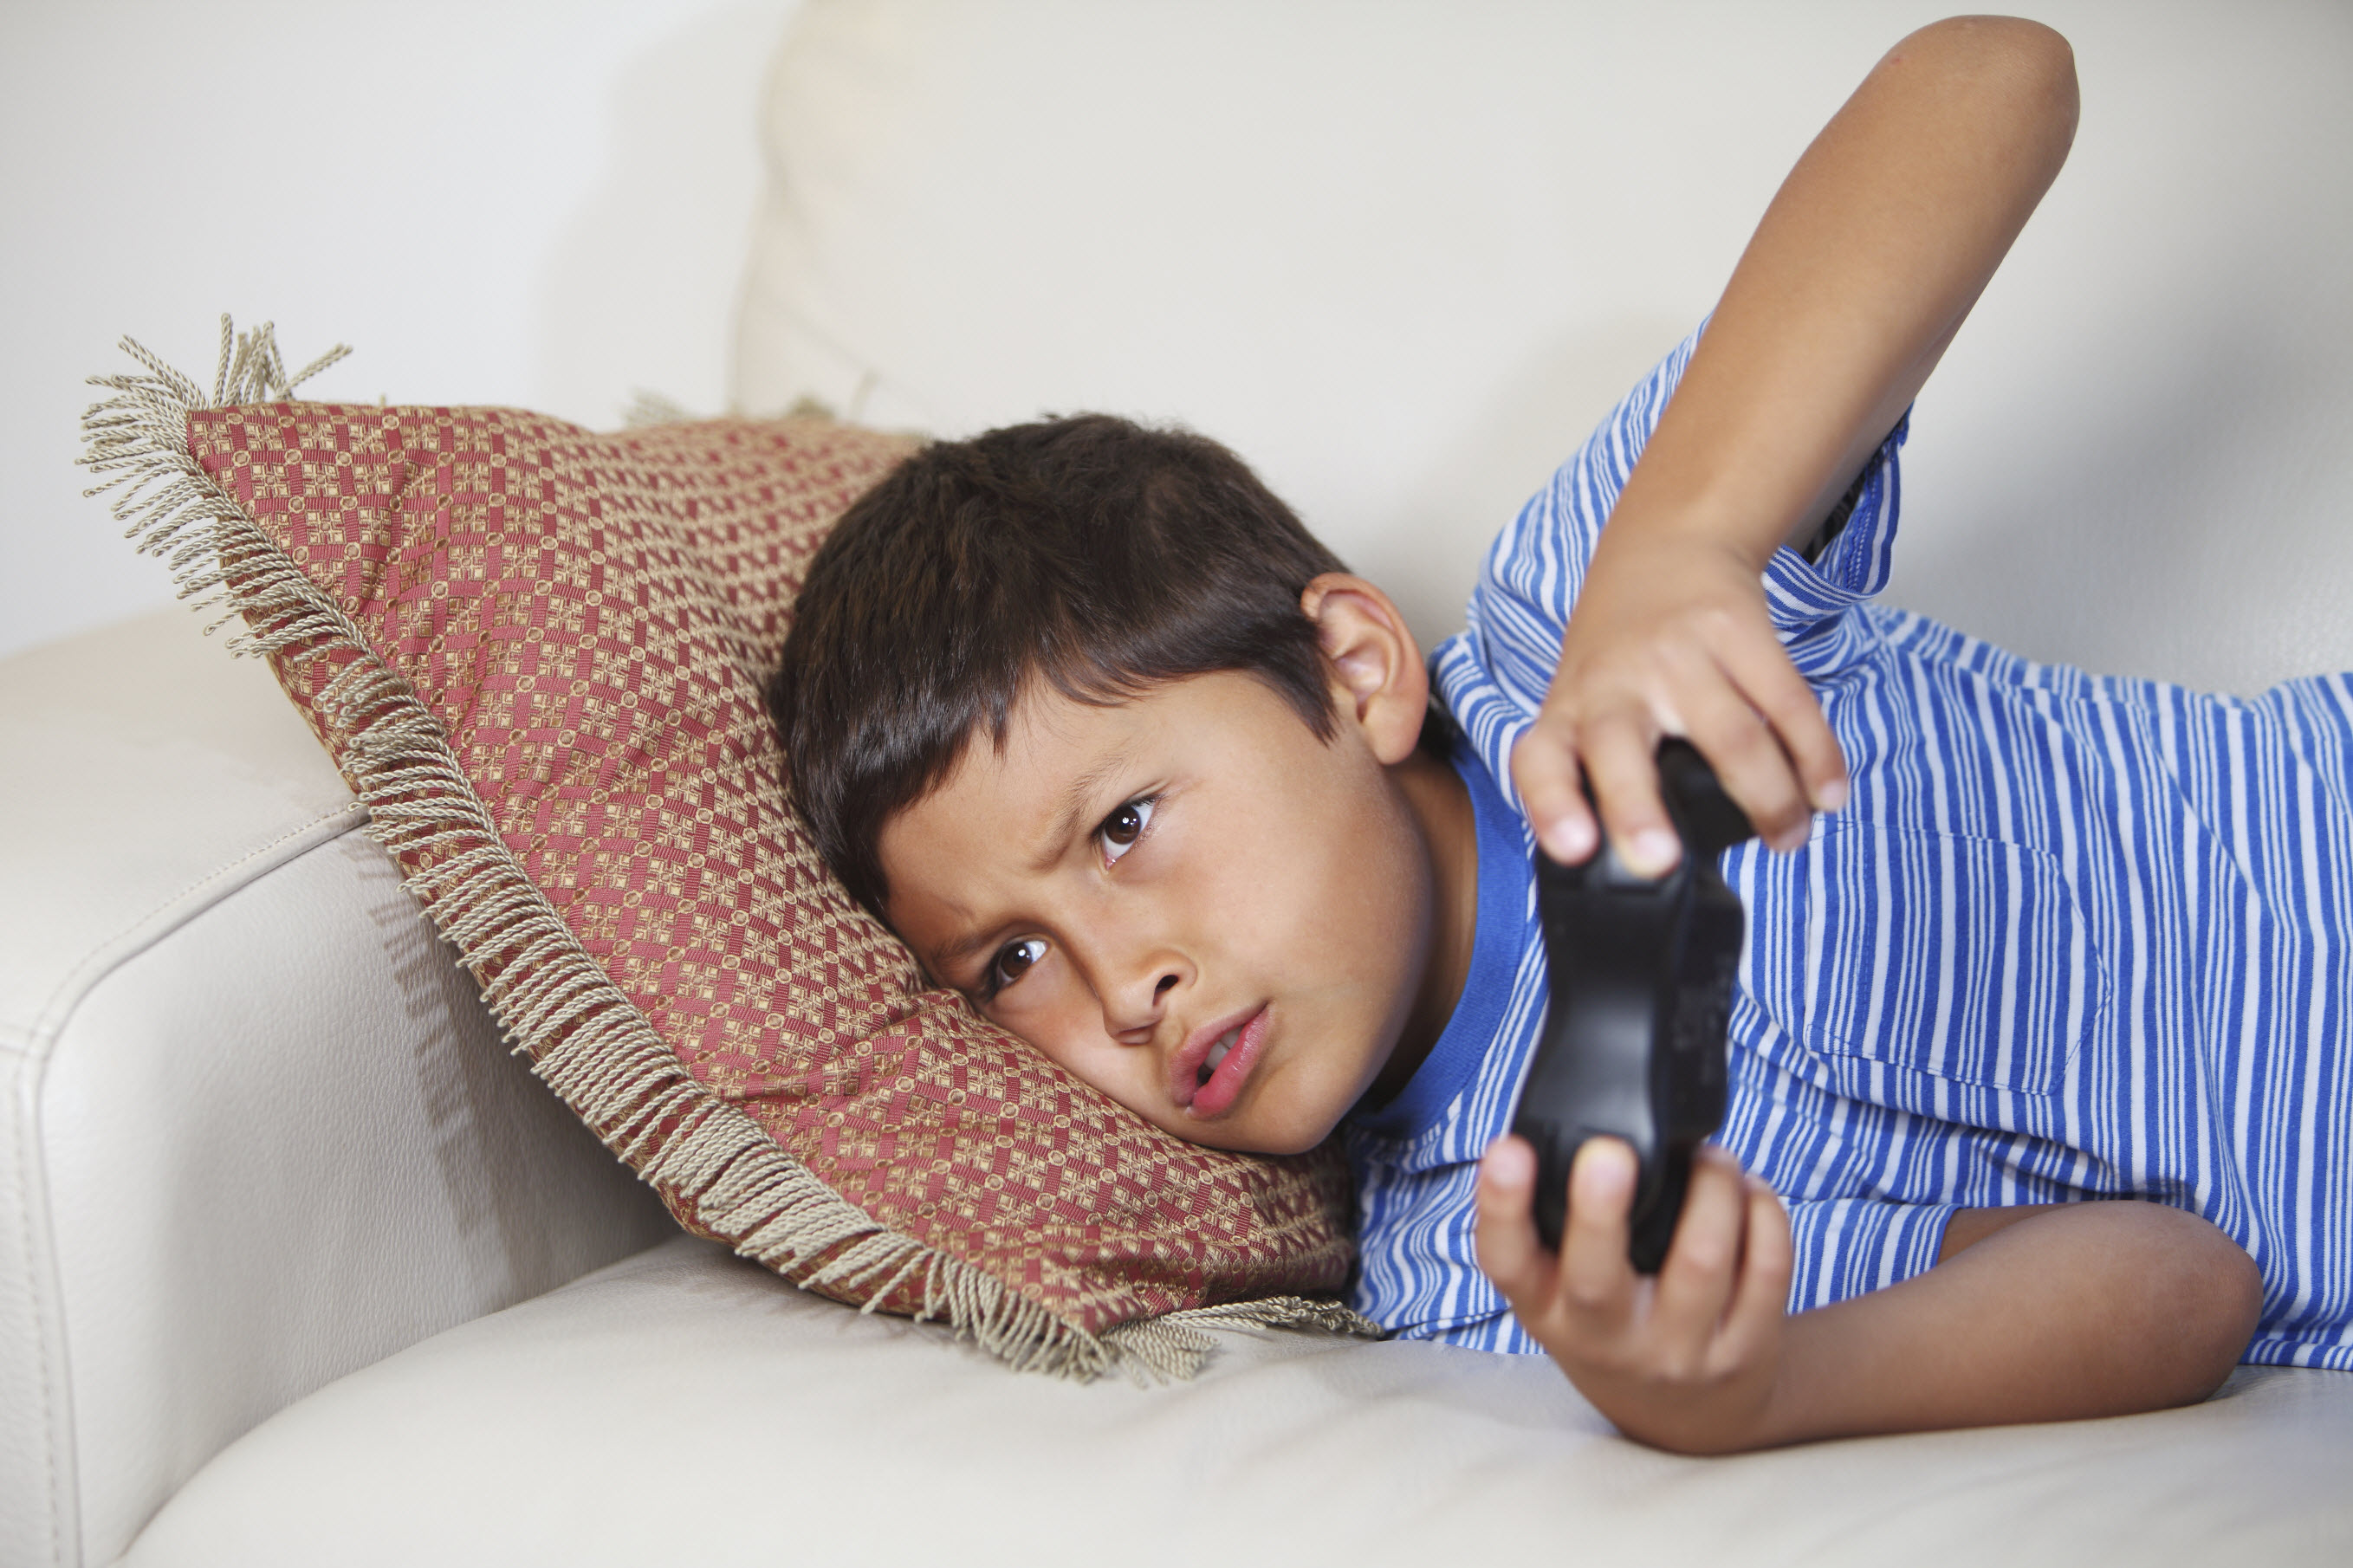 popular video games for 10 year olds